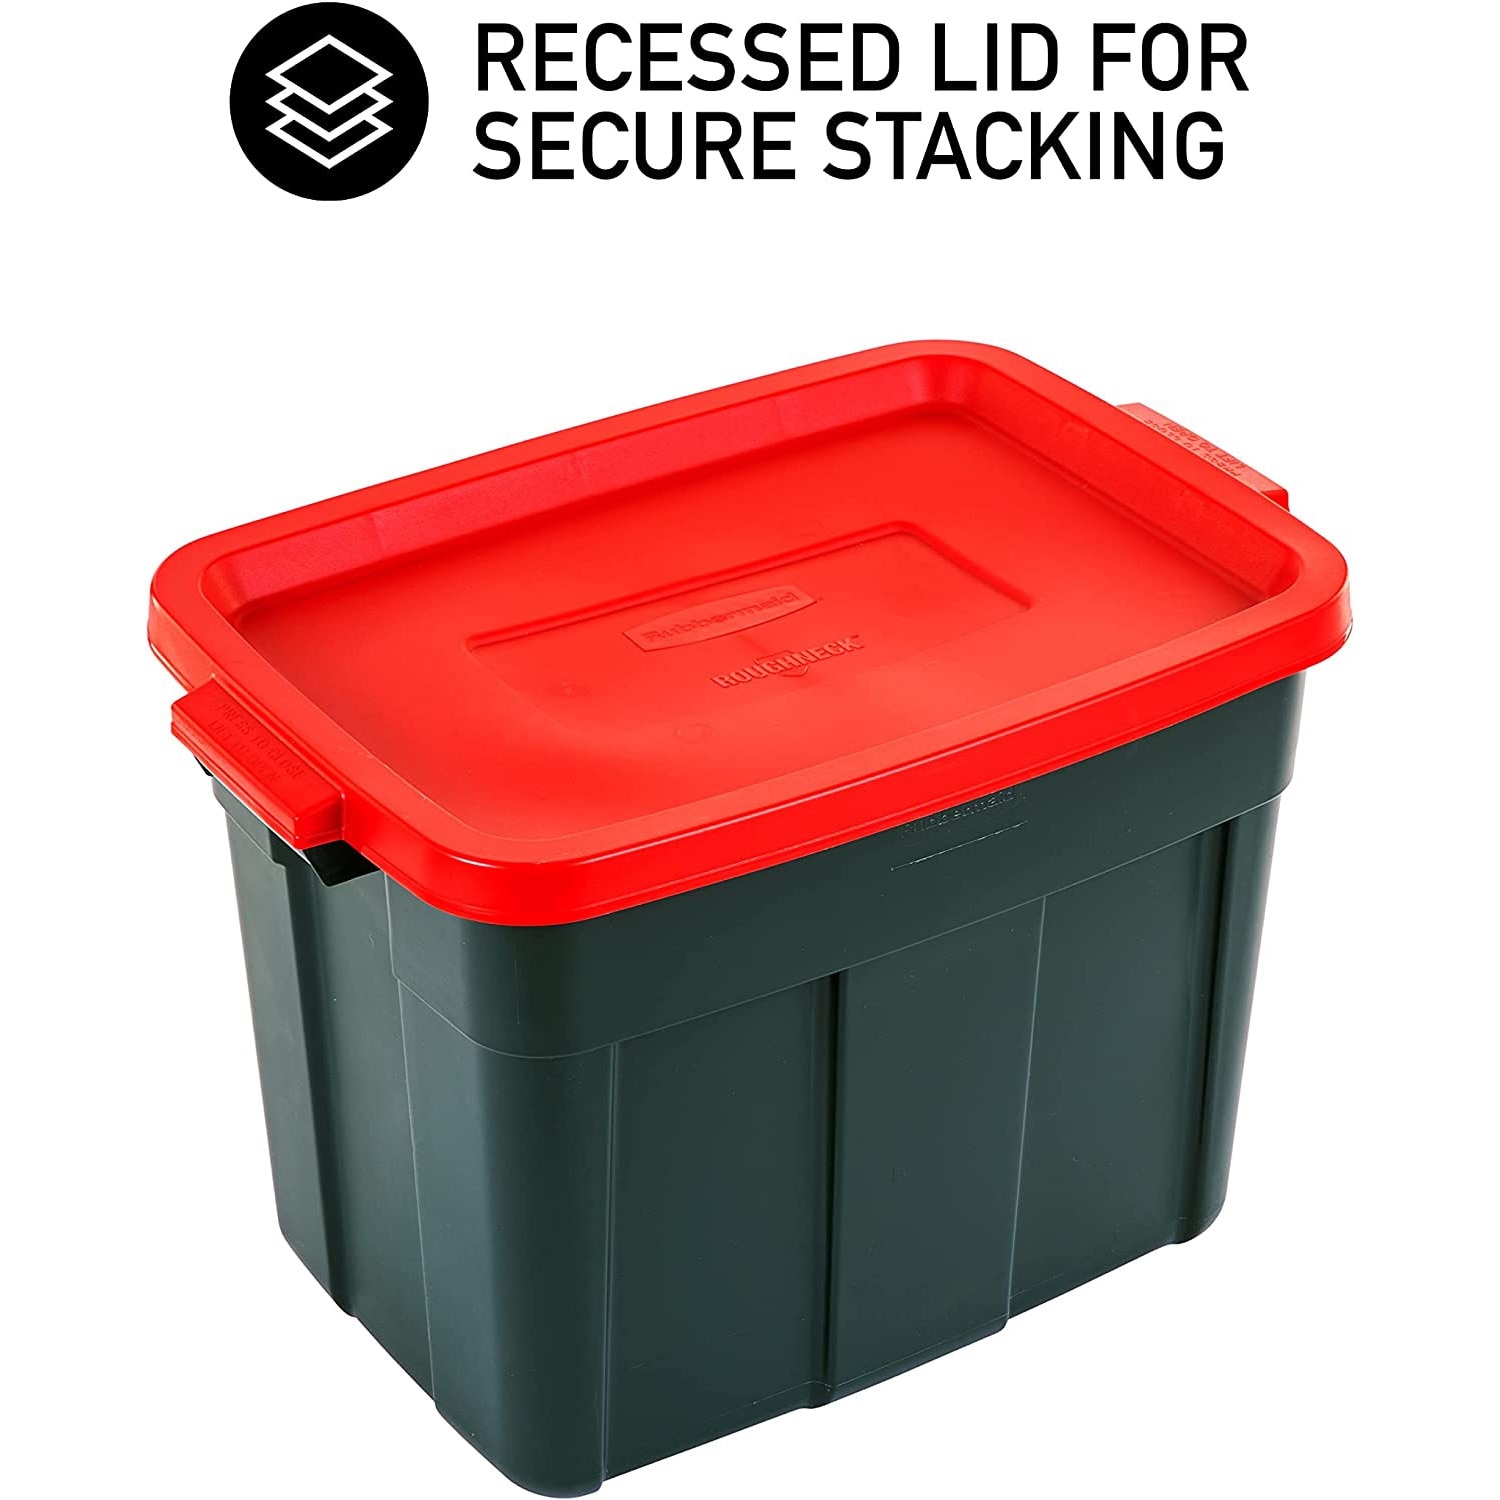 https://ak1.ostkcdn.com/images/products/is/images/direct/09b39aefba129b80e9b90bbddda03485bbca94cb/Rubbermaid-Roughneck-18-Gal-Plastic-Holiday-Storage-Tote%2C-Green-and-Red-%286-Pack%29.jpg